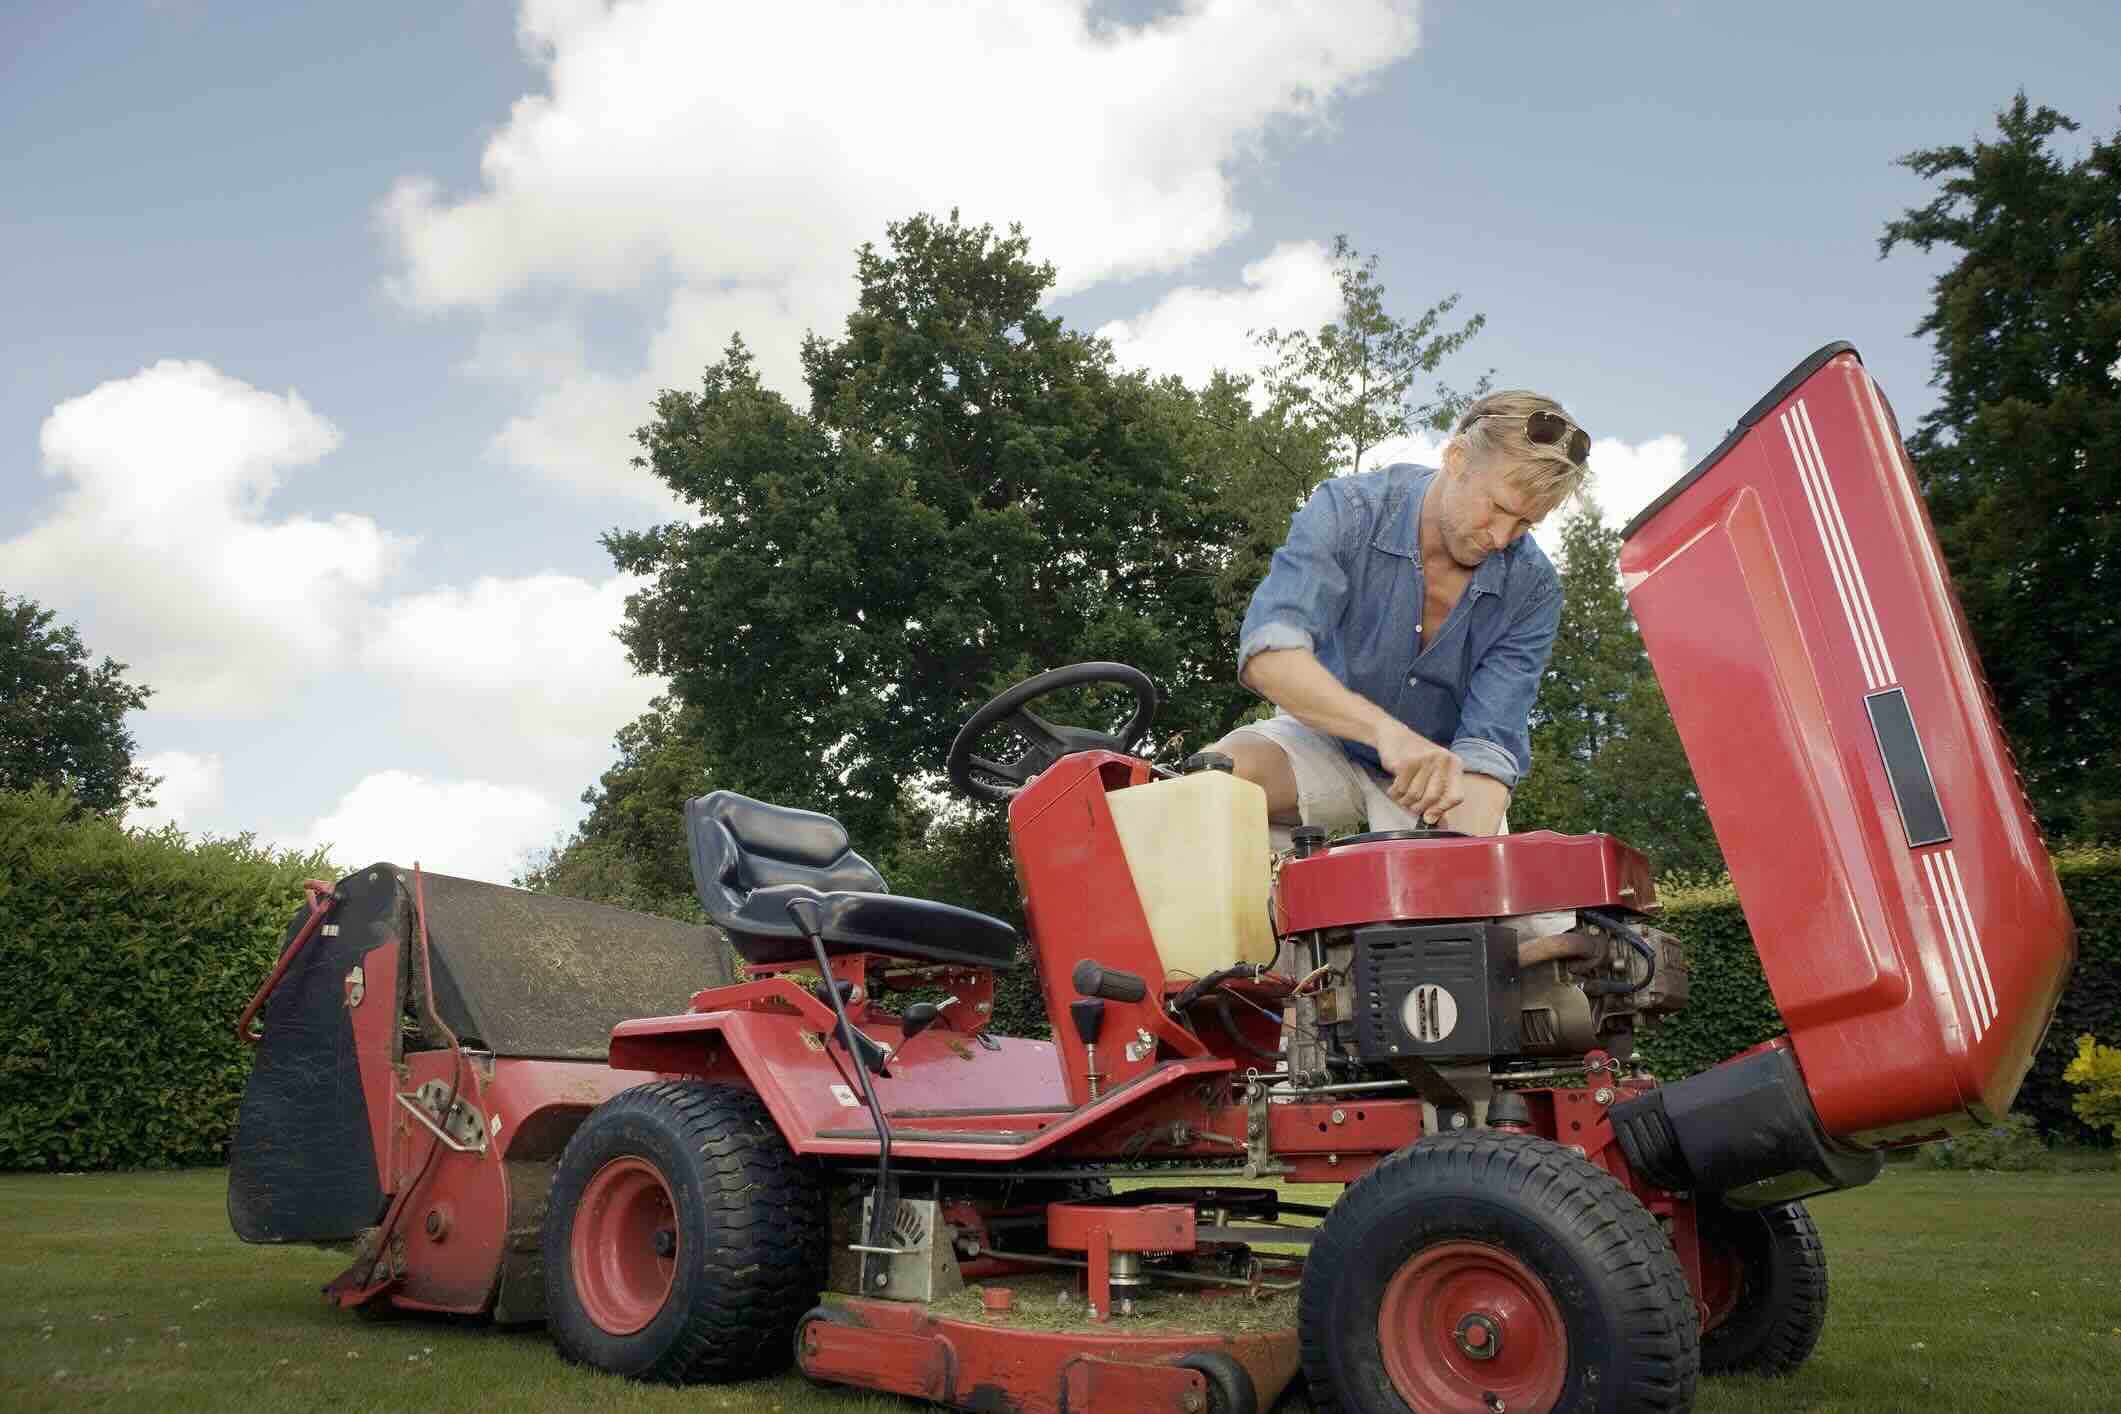 How To Change A Lawnmower Battery